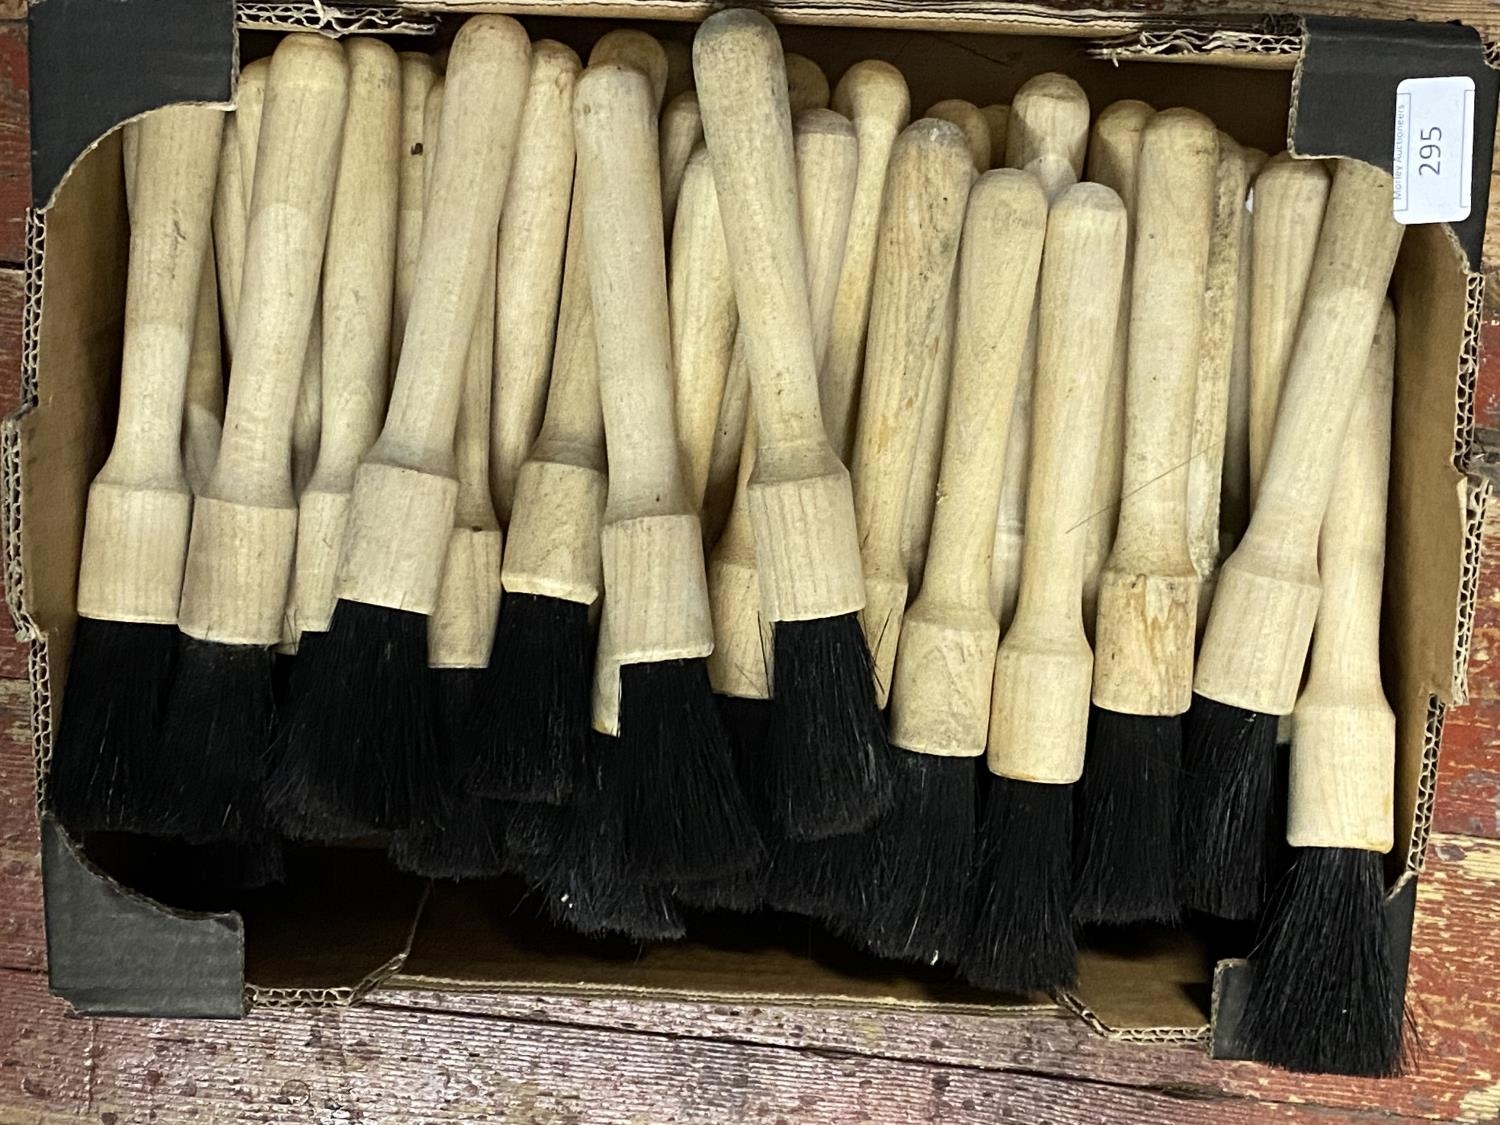 A job lot of new brushes